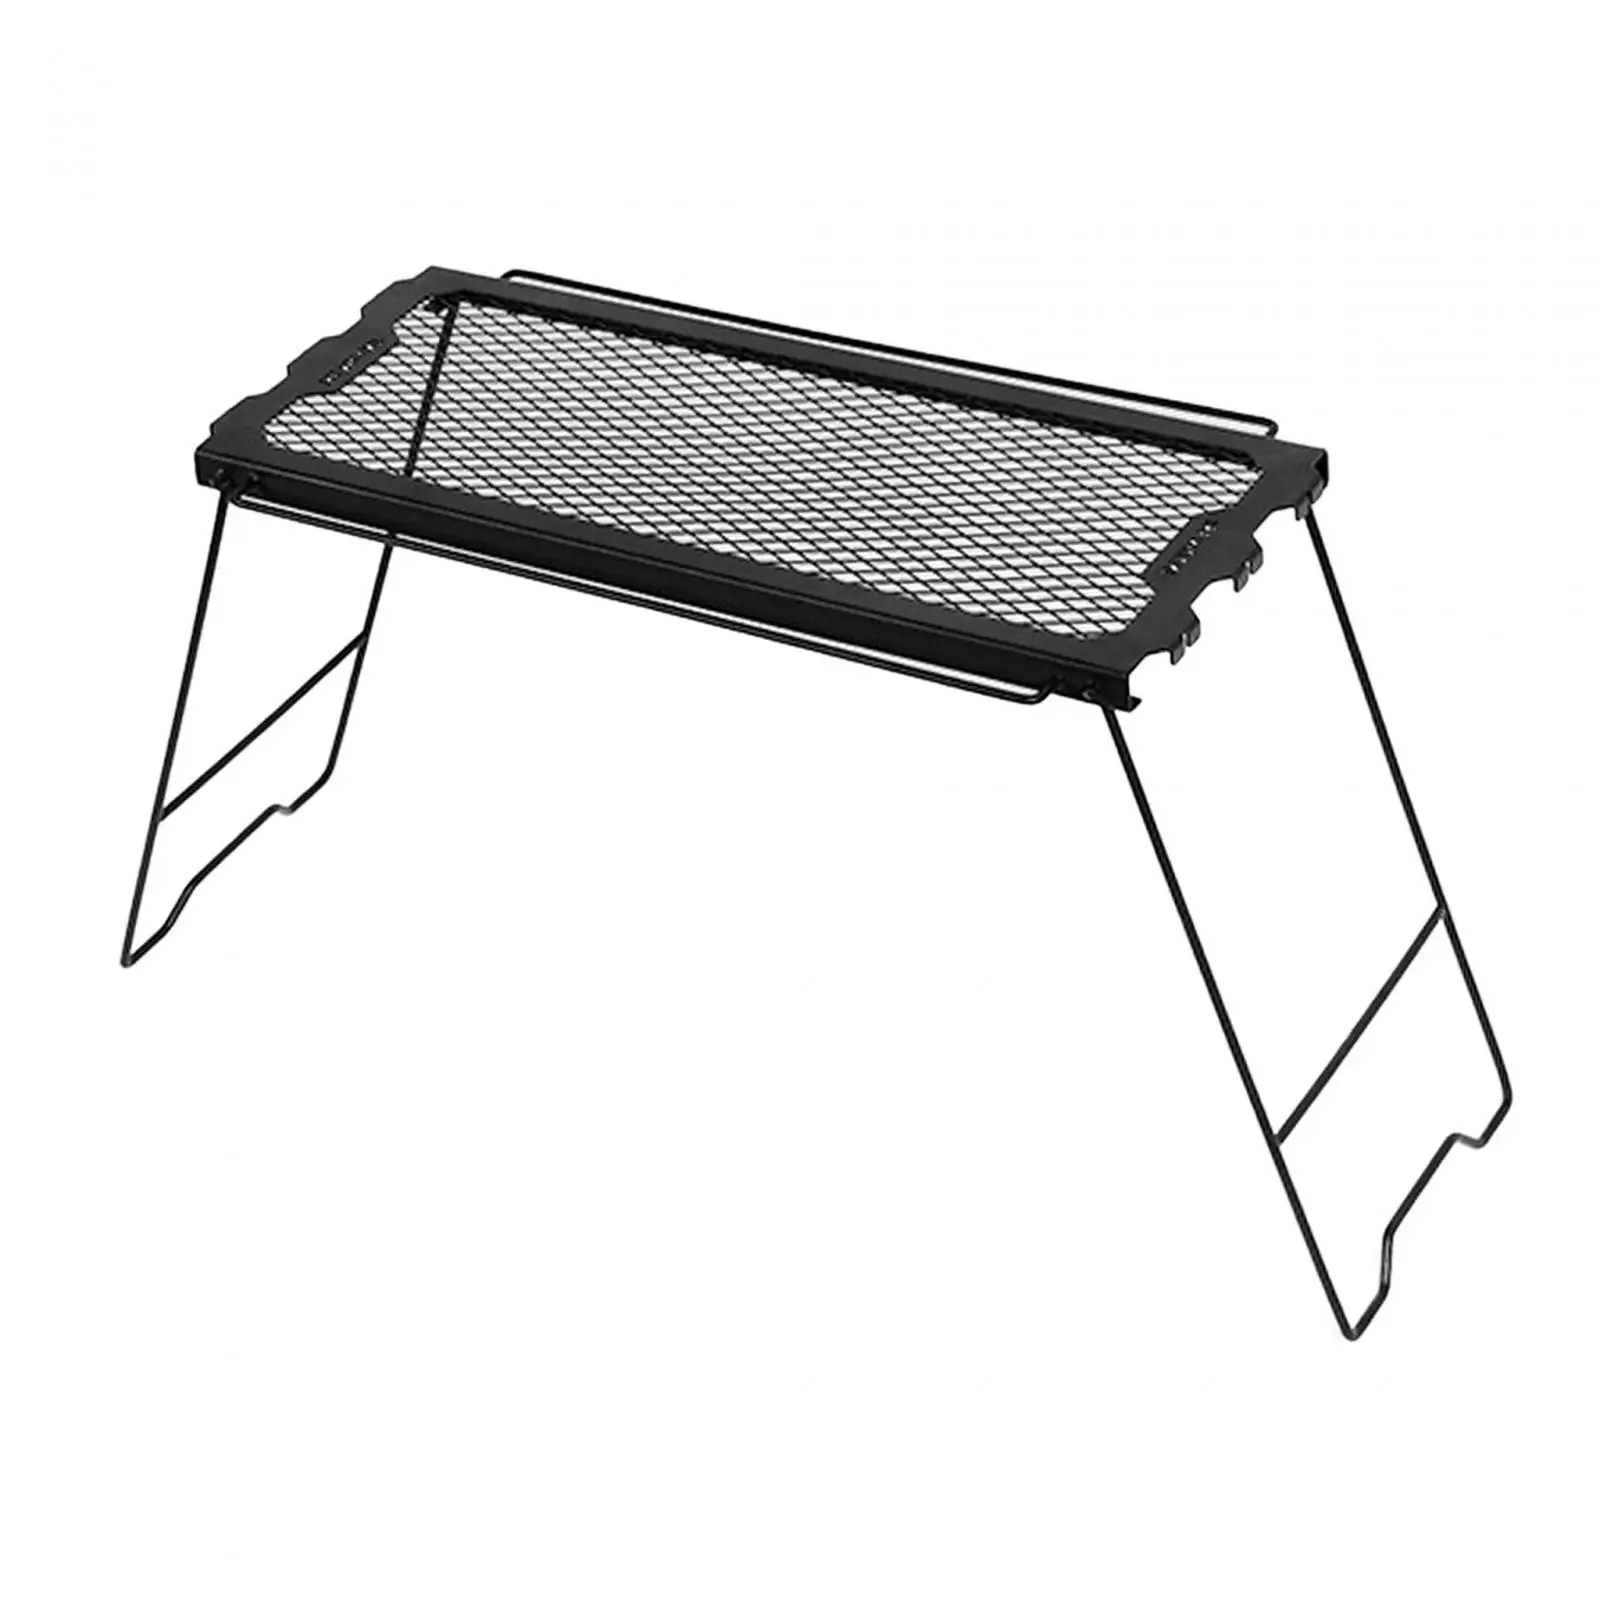 Folding Camping Table Foldable Campfire Grill Heavy Duty Compact Camping Cooking Grate Small Table for RV Hiking Black